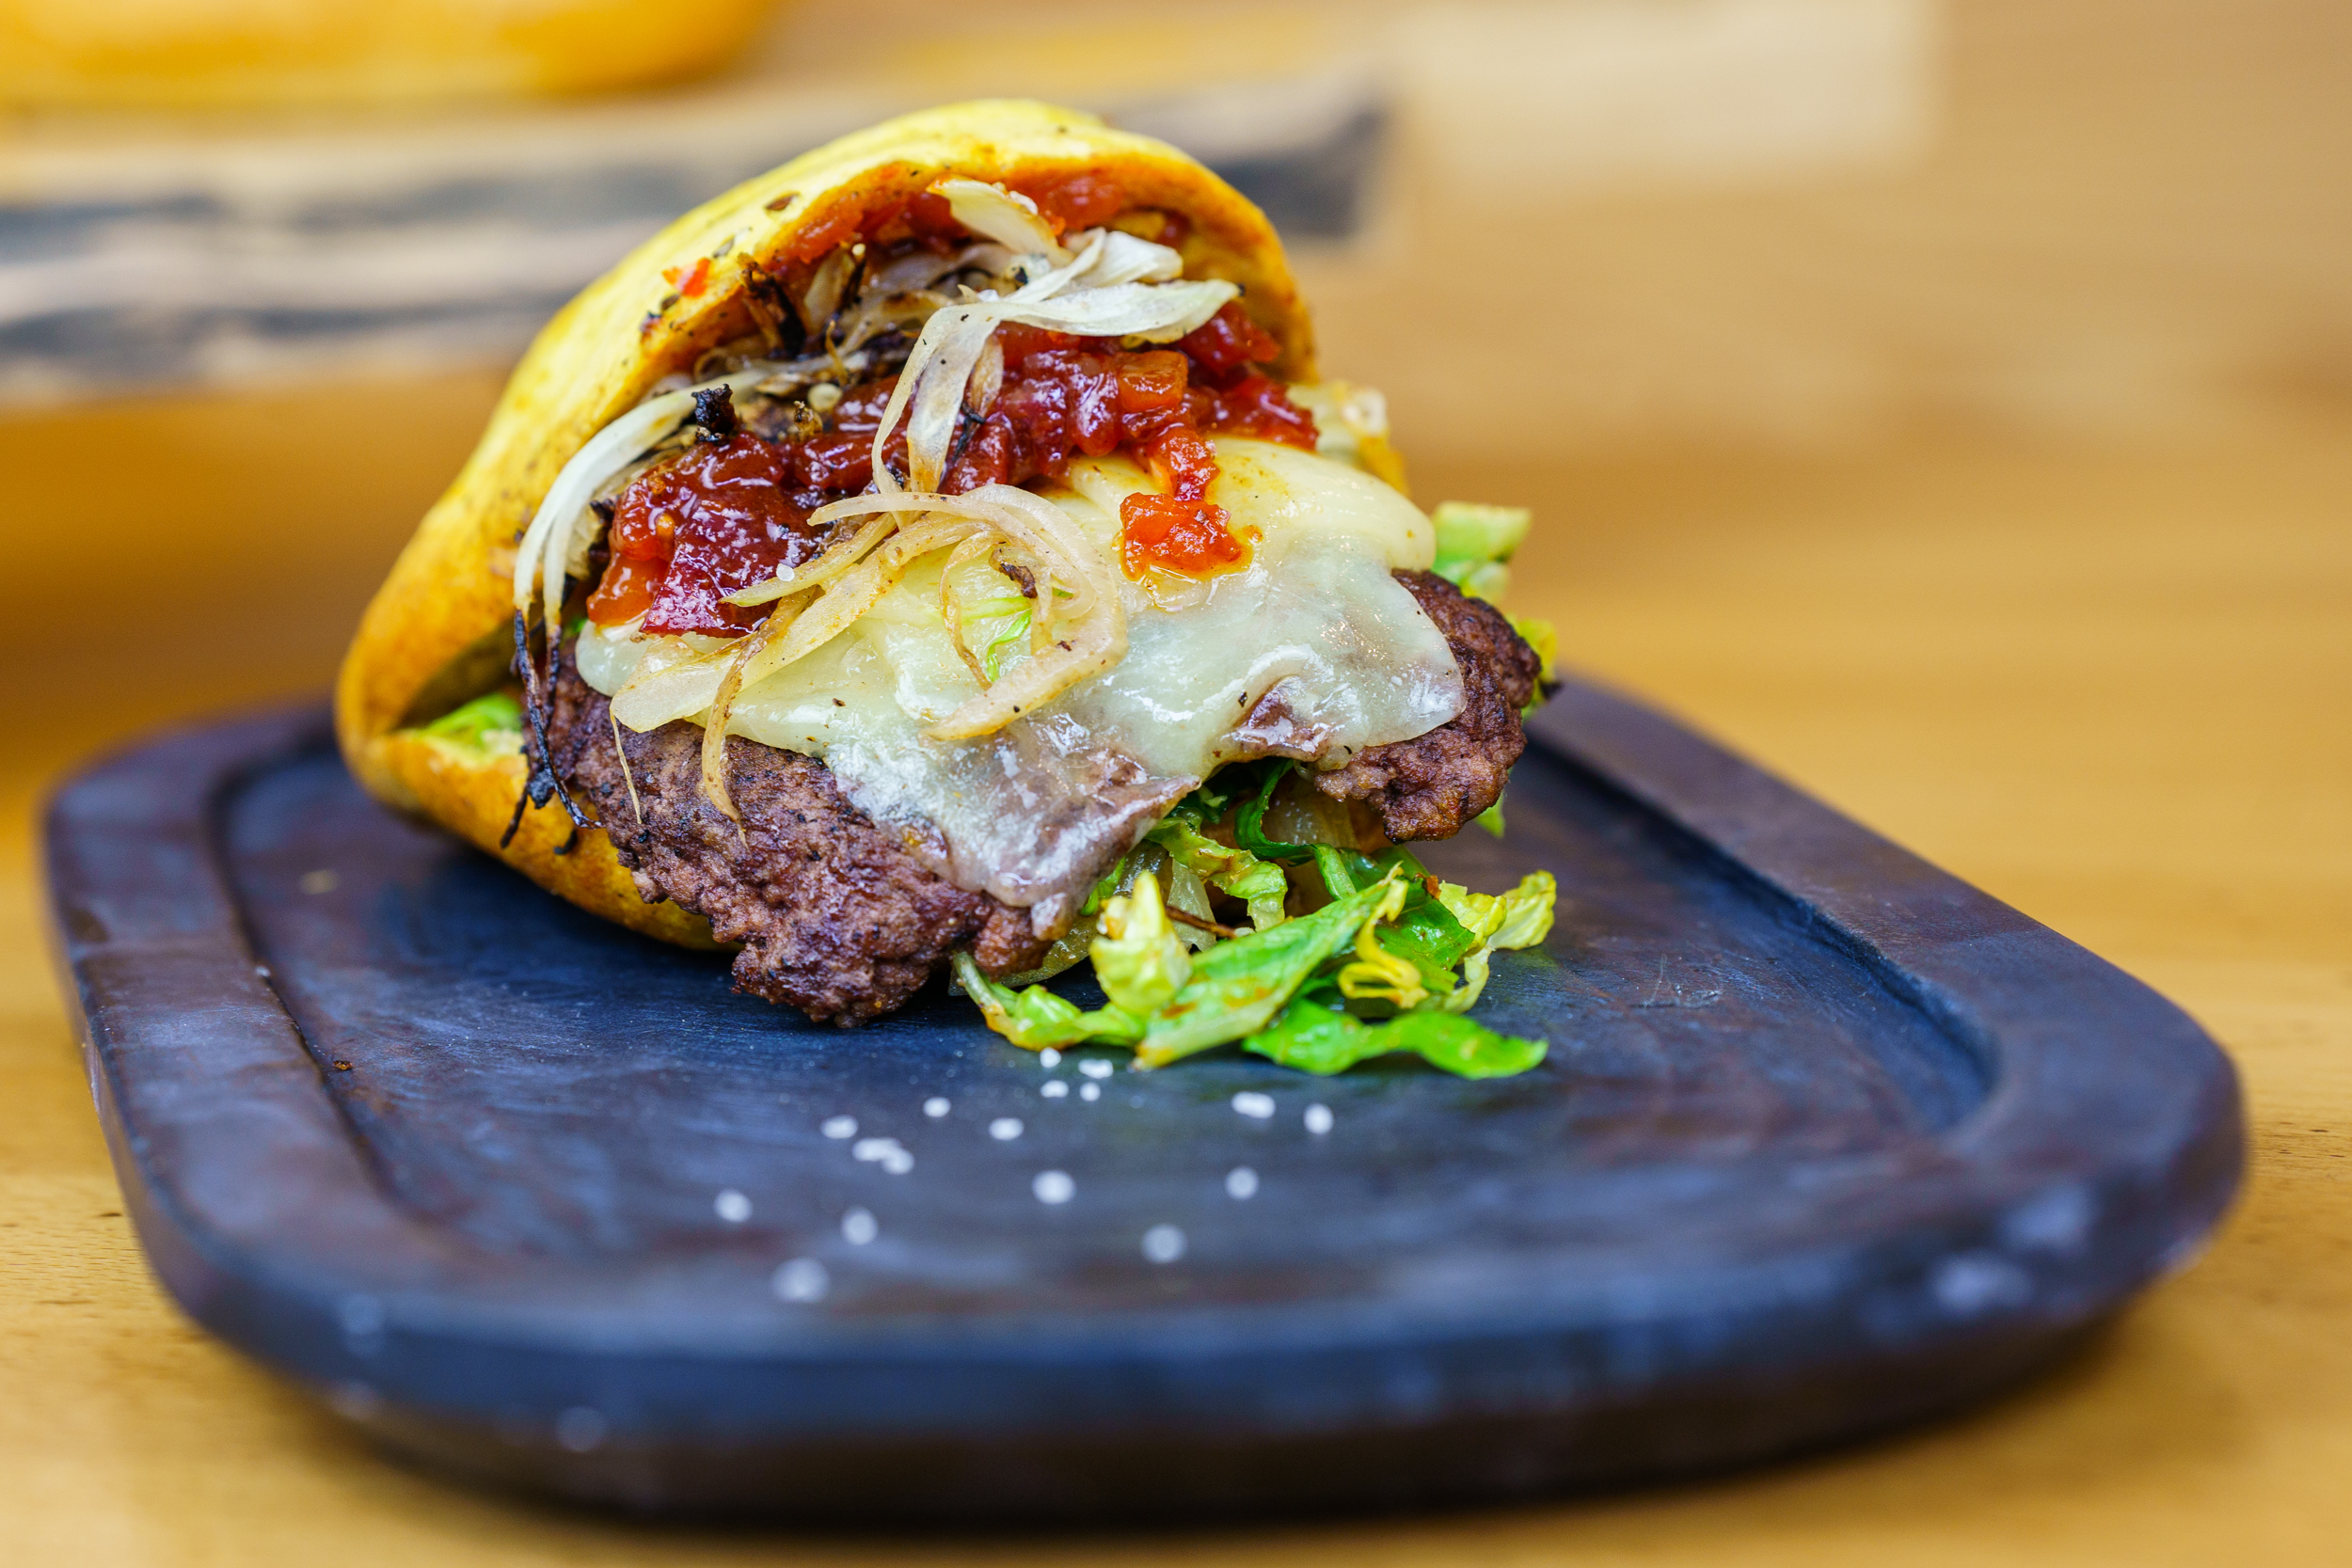 A burger with cheese, tomato jam, and onions arranged on a slate serving slab.